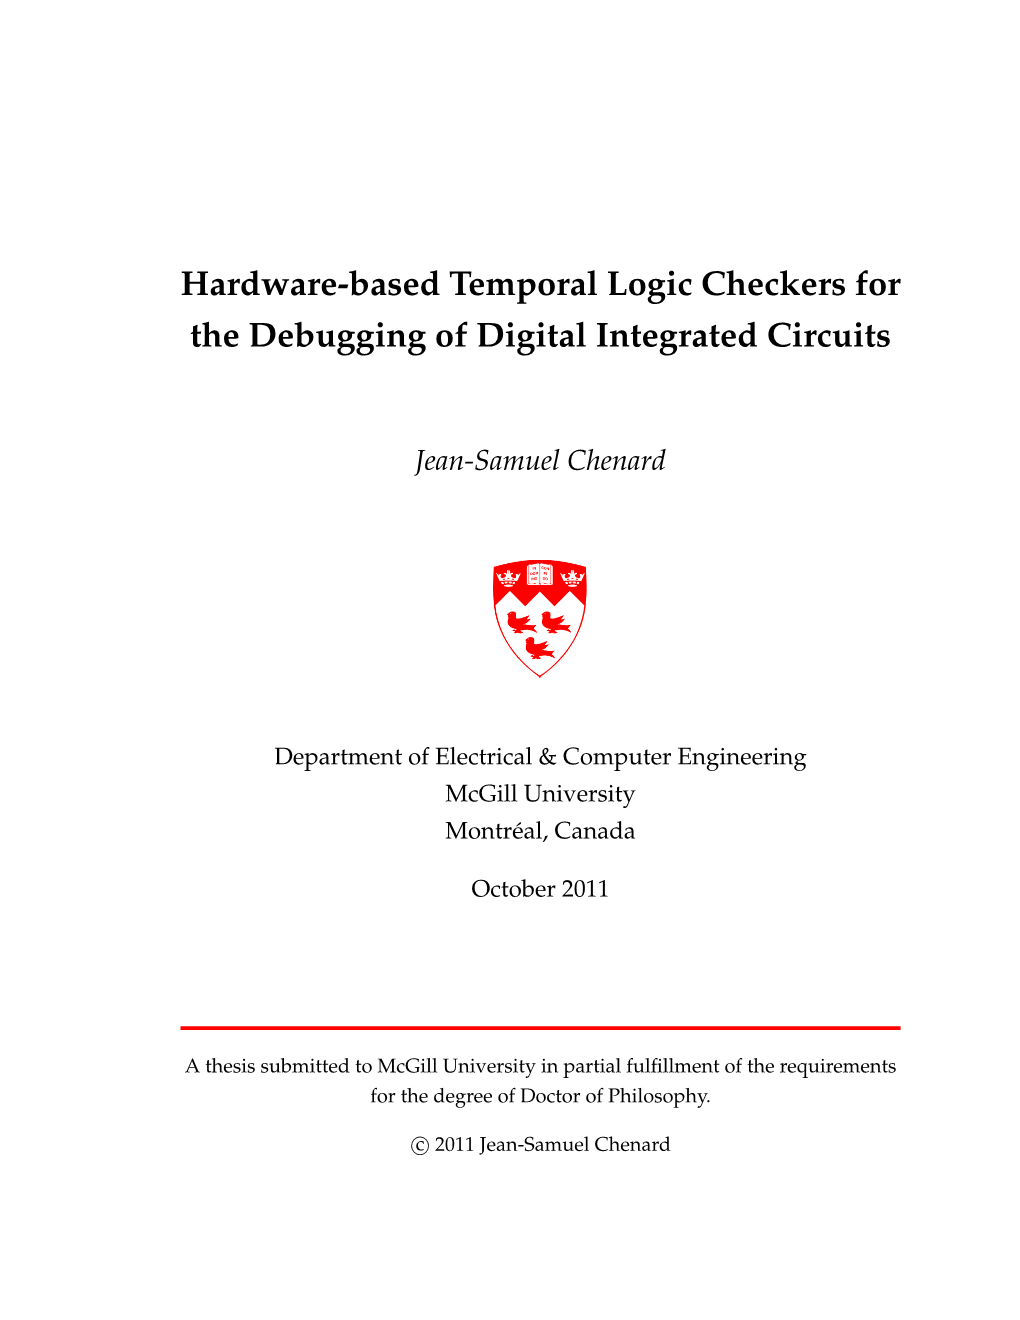 Hardware-Based Temporal Logic Checkers for the Debugging of Digital Integrated Circuits